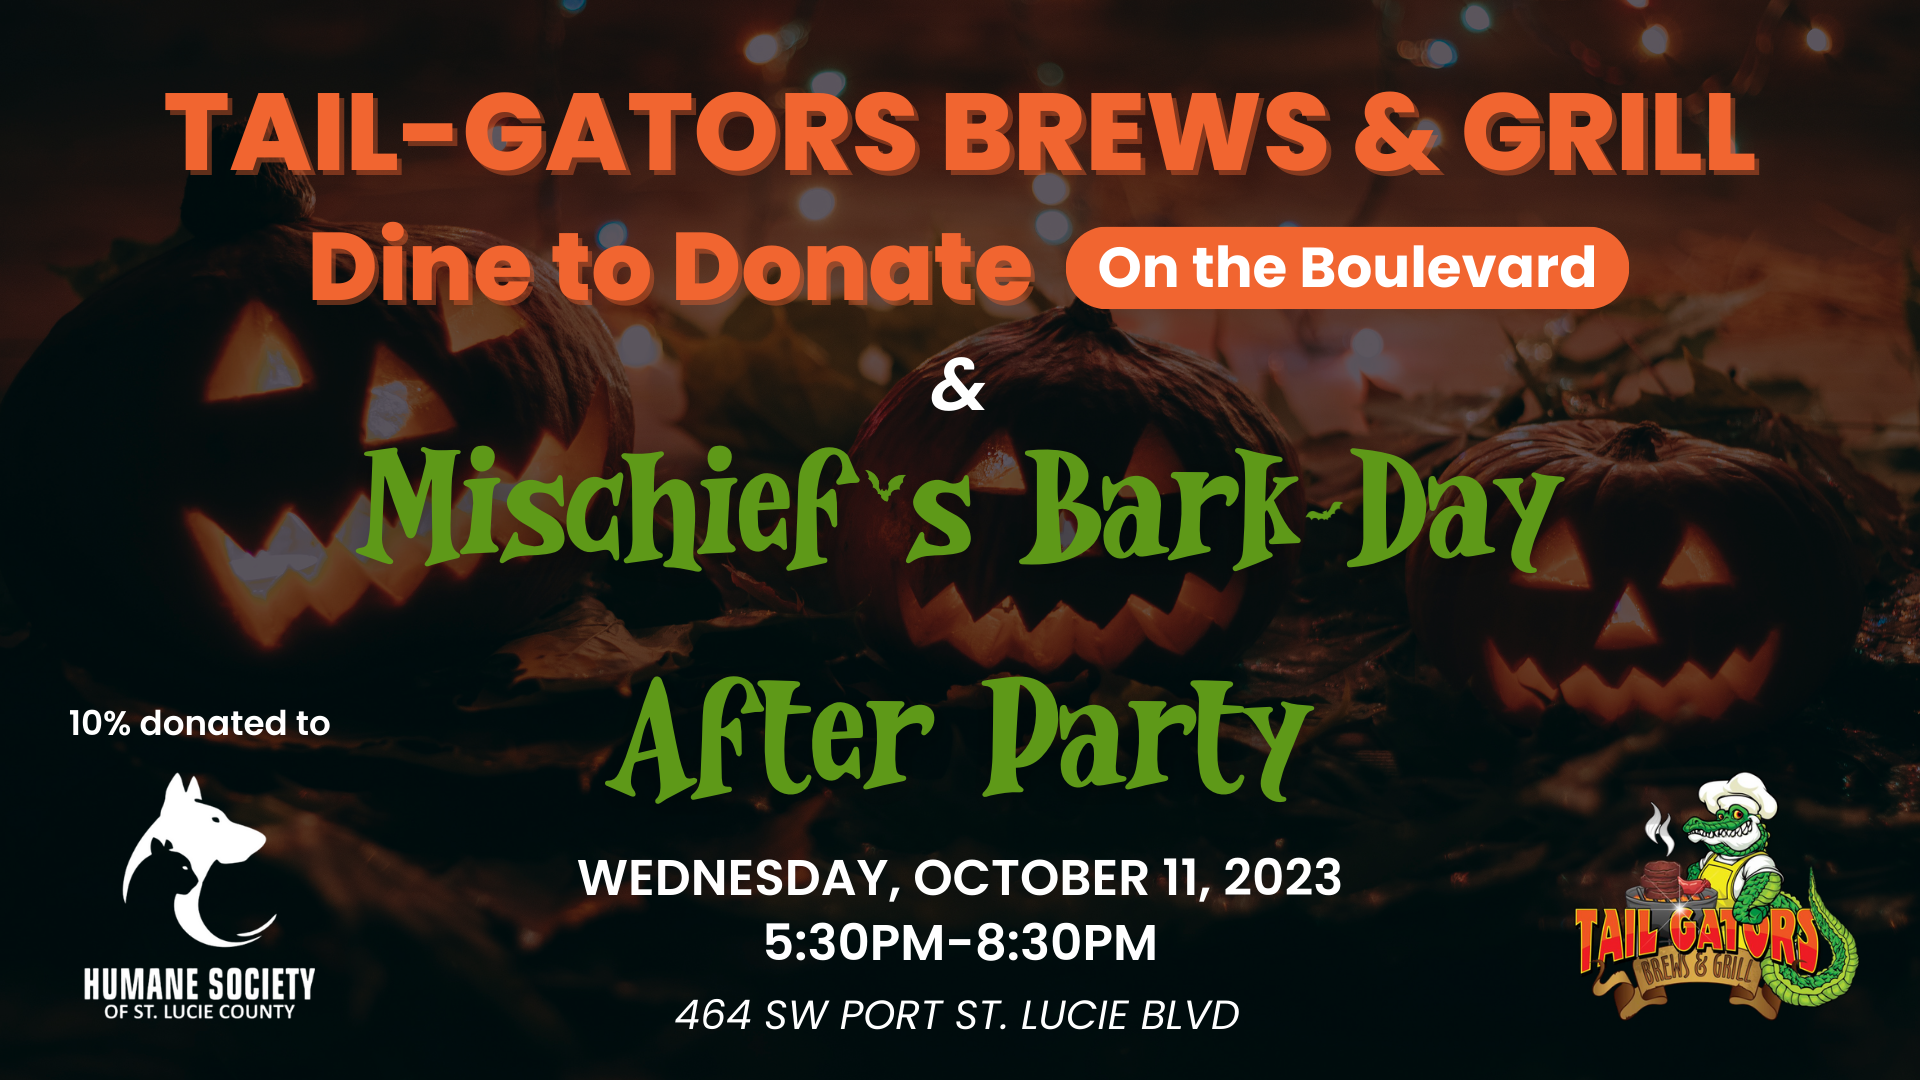 Dine to Donate at Tail Gators in Port Saint Lucie